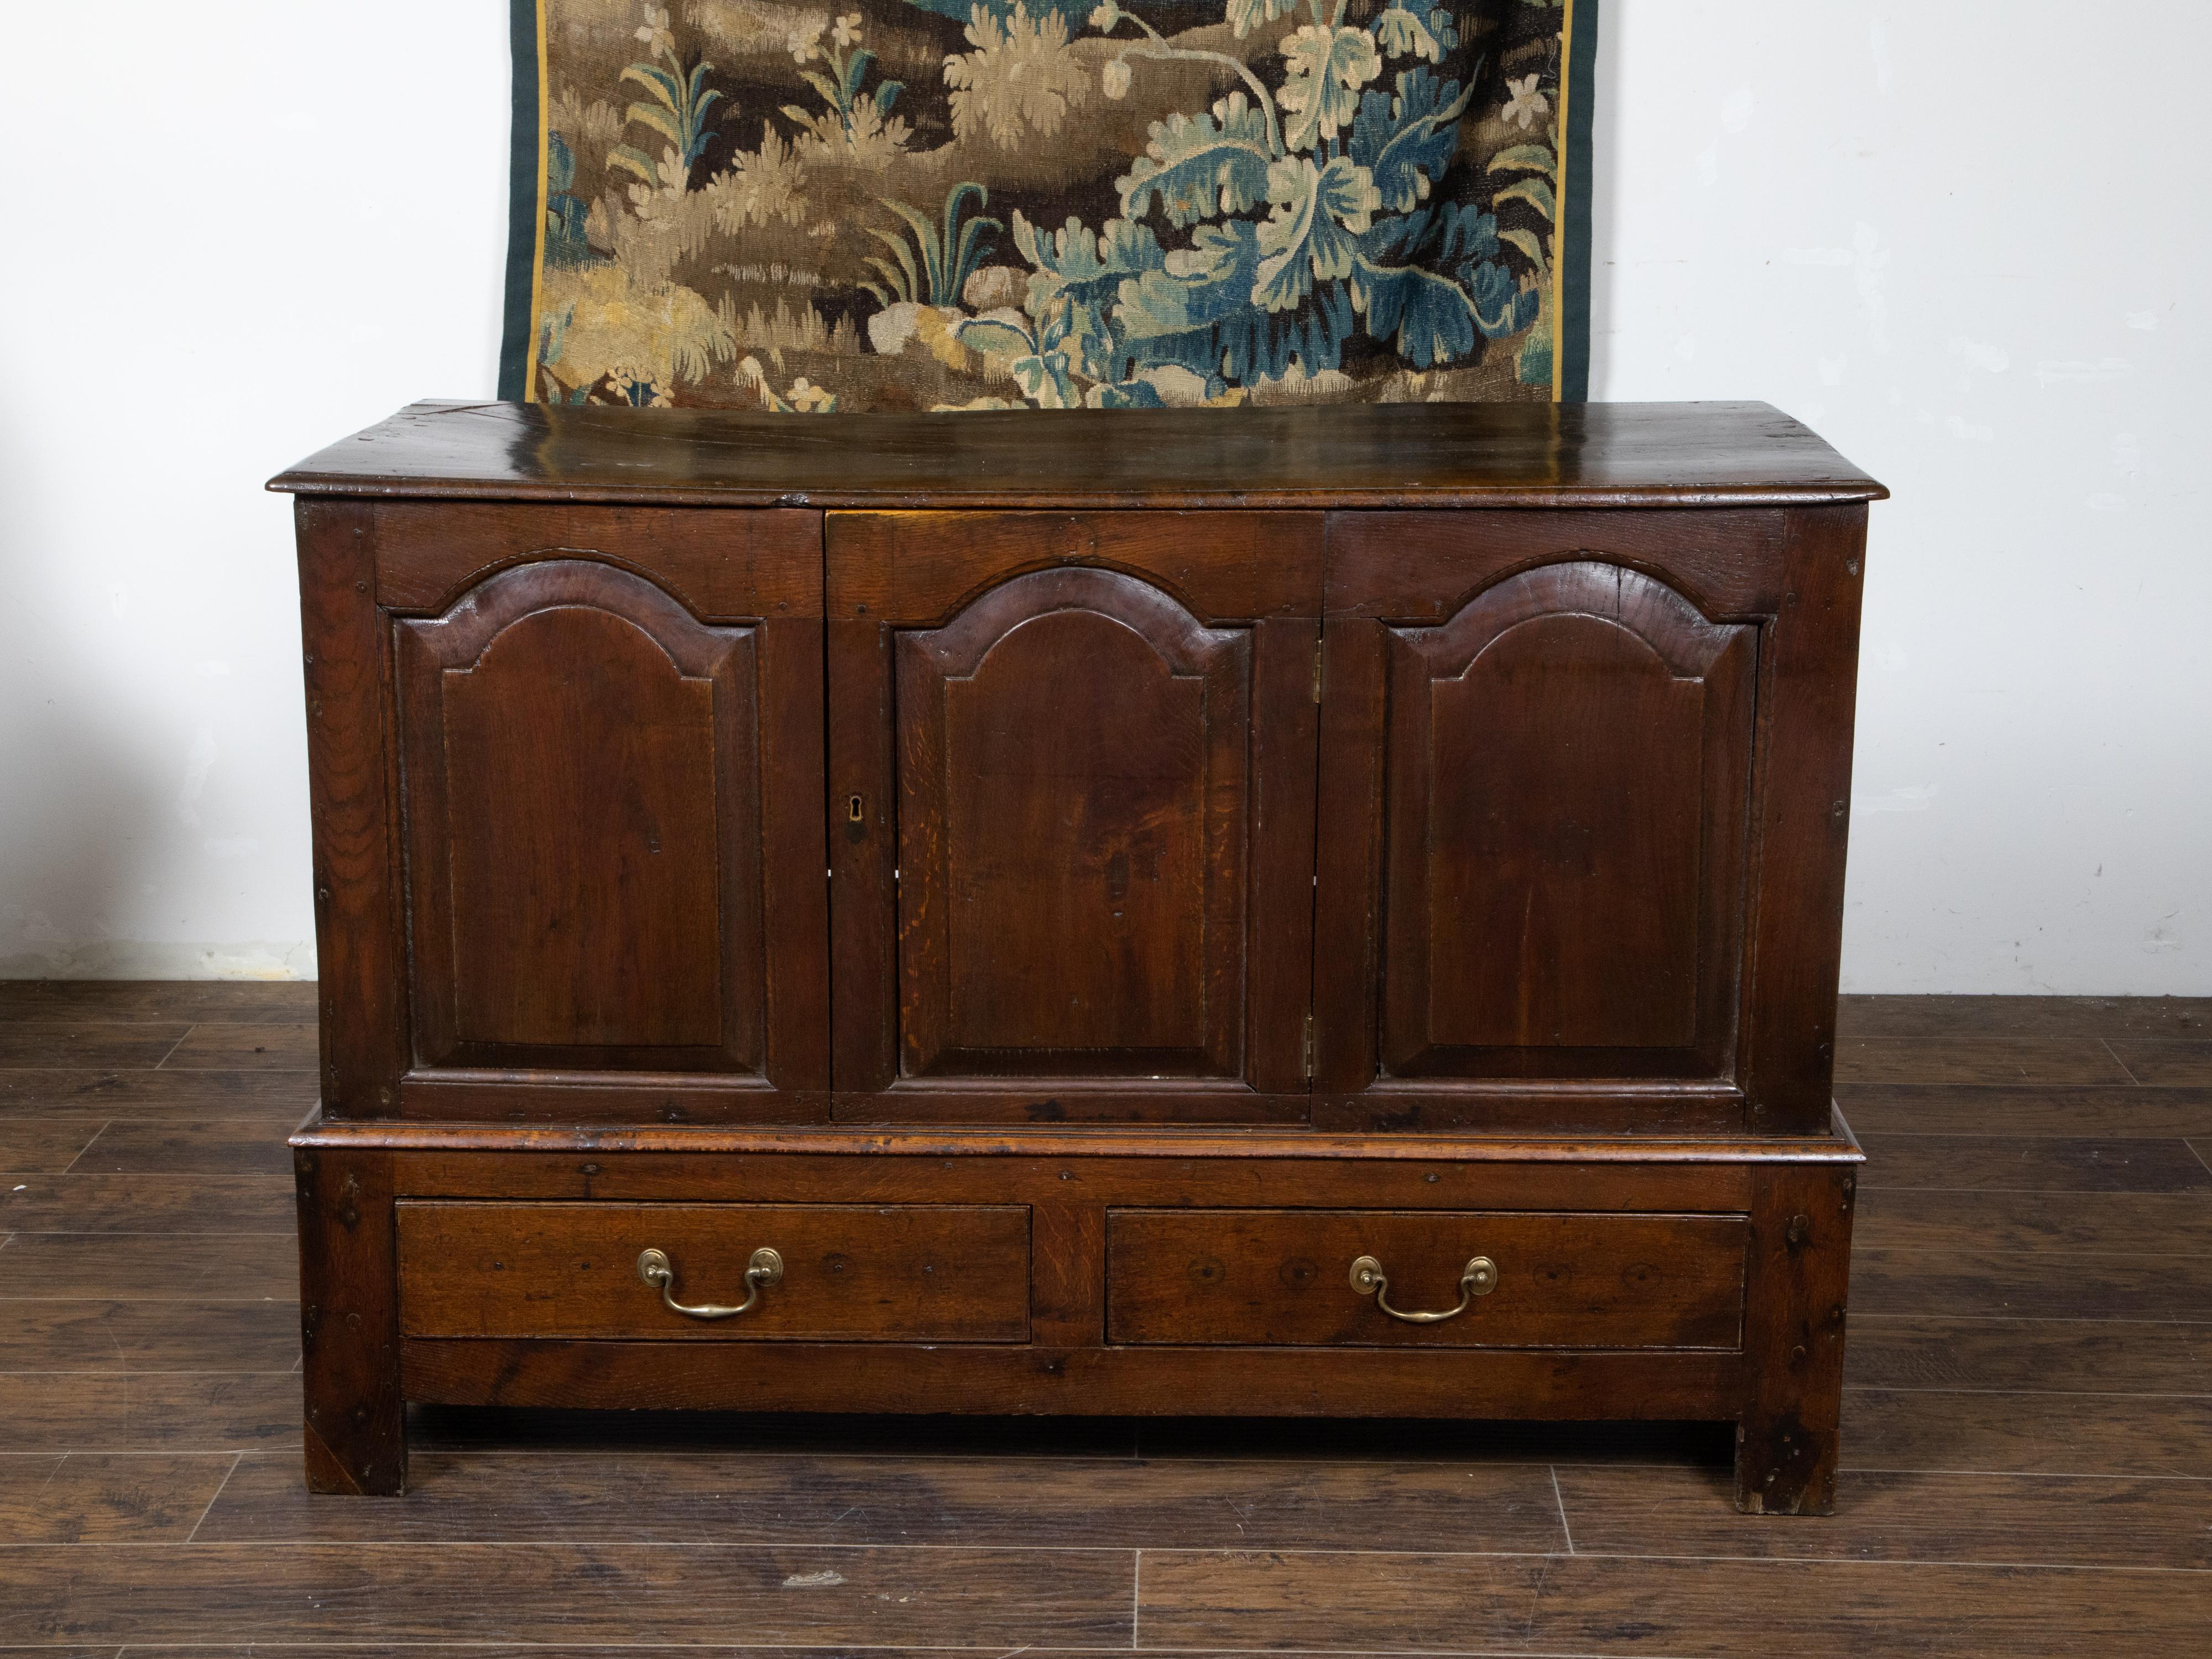 An English Georgian period oak buffet from the 18th century, with single central door, two drawers, carved arching motifs and brass hardware. Created in England during the Georgian era in the 18th century, this oak buffet features a rectangular top